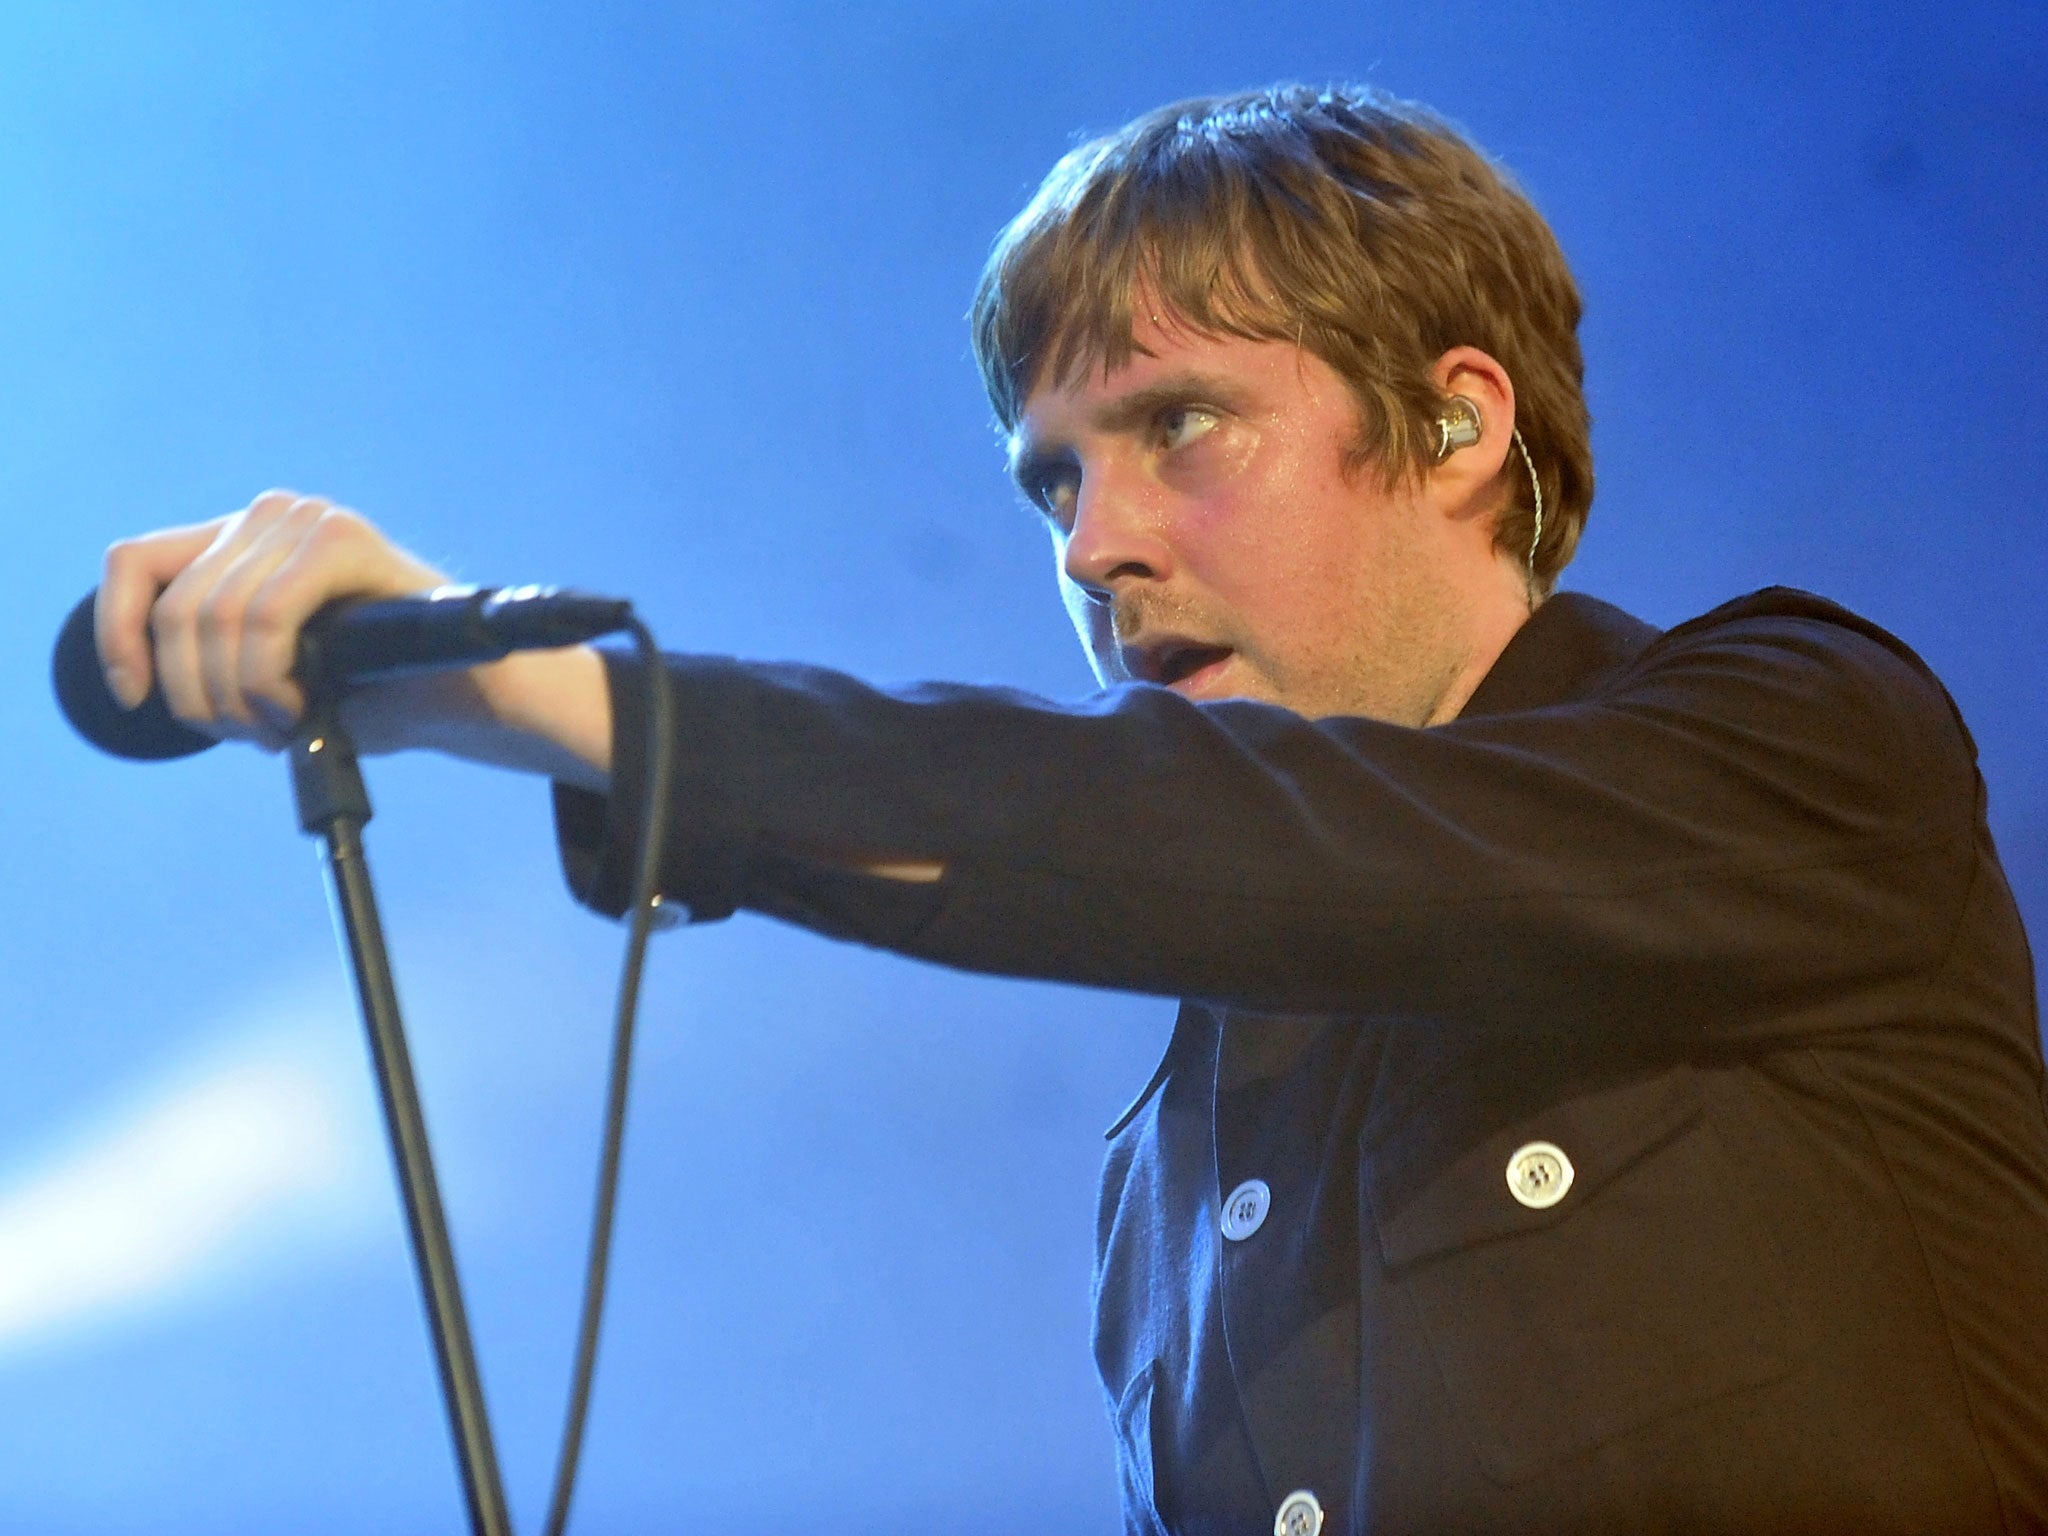 Kaiser Chiefs (lead singer Ricky Wilson, above) were were the first act announced as part of the Leeds Arena opening season